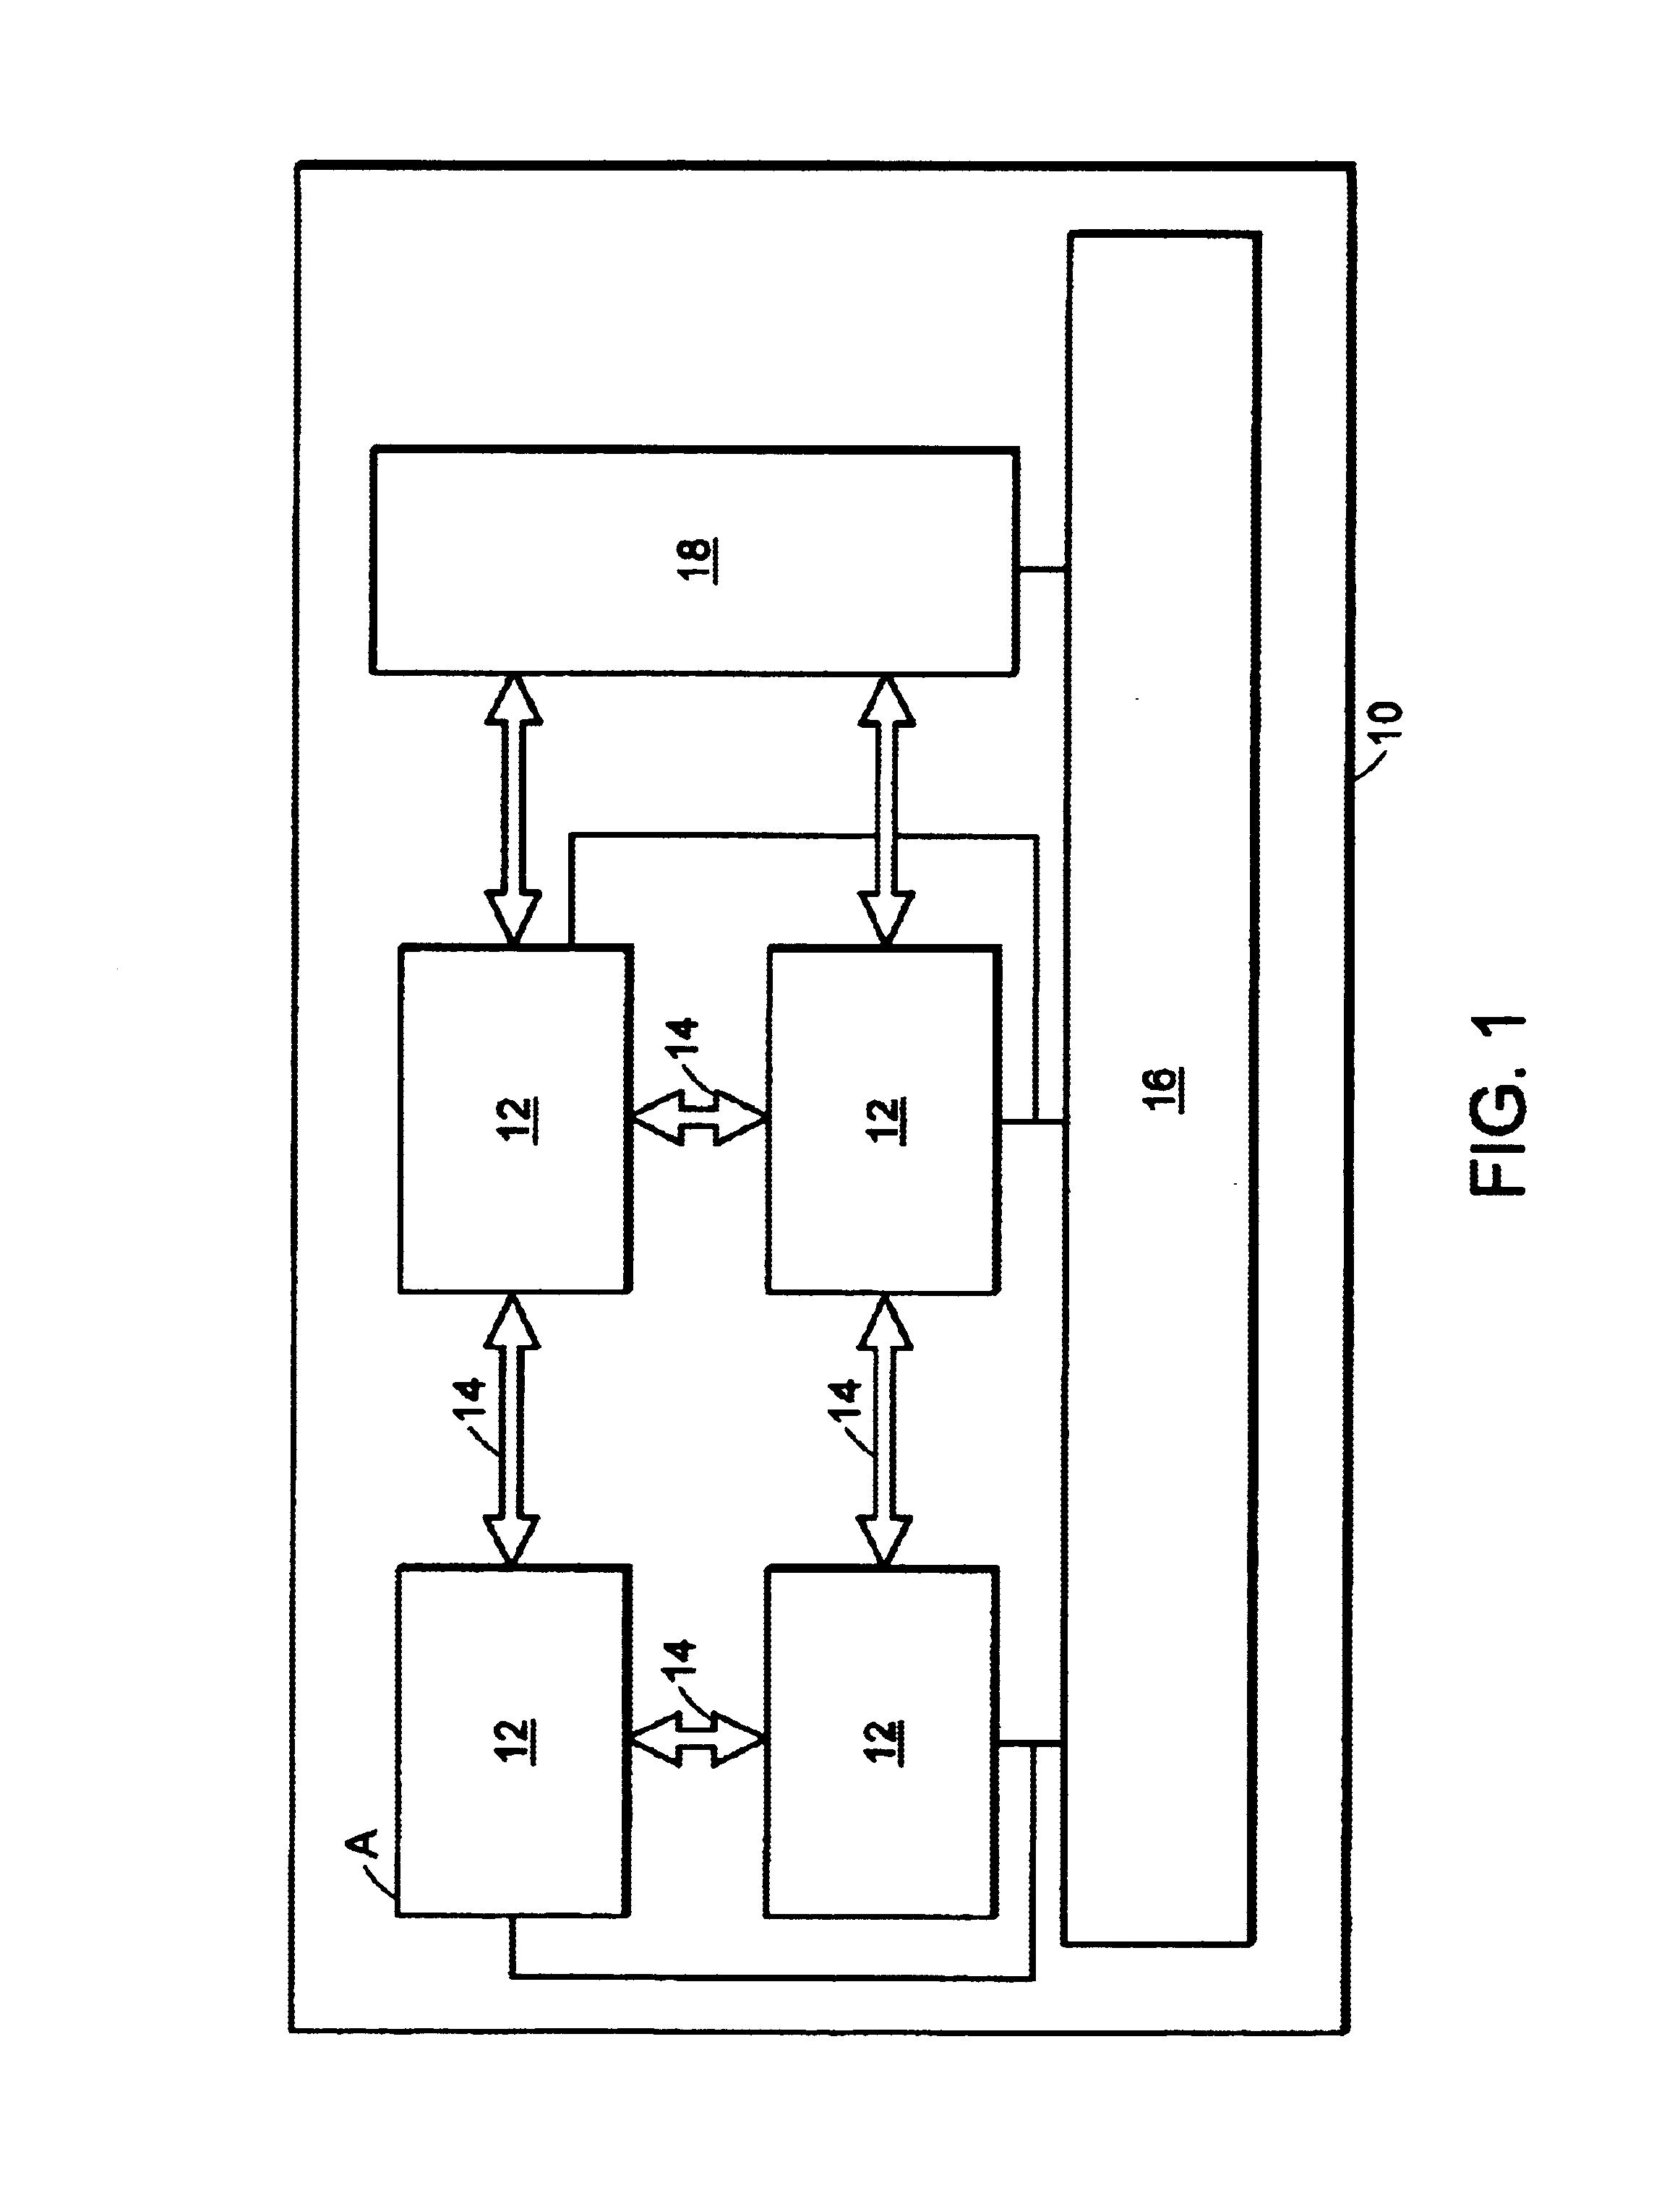 High speed access bus interface and protocol